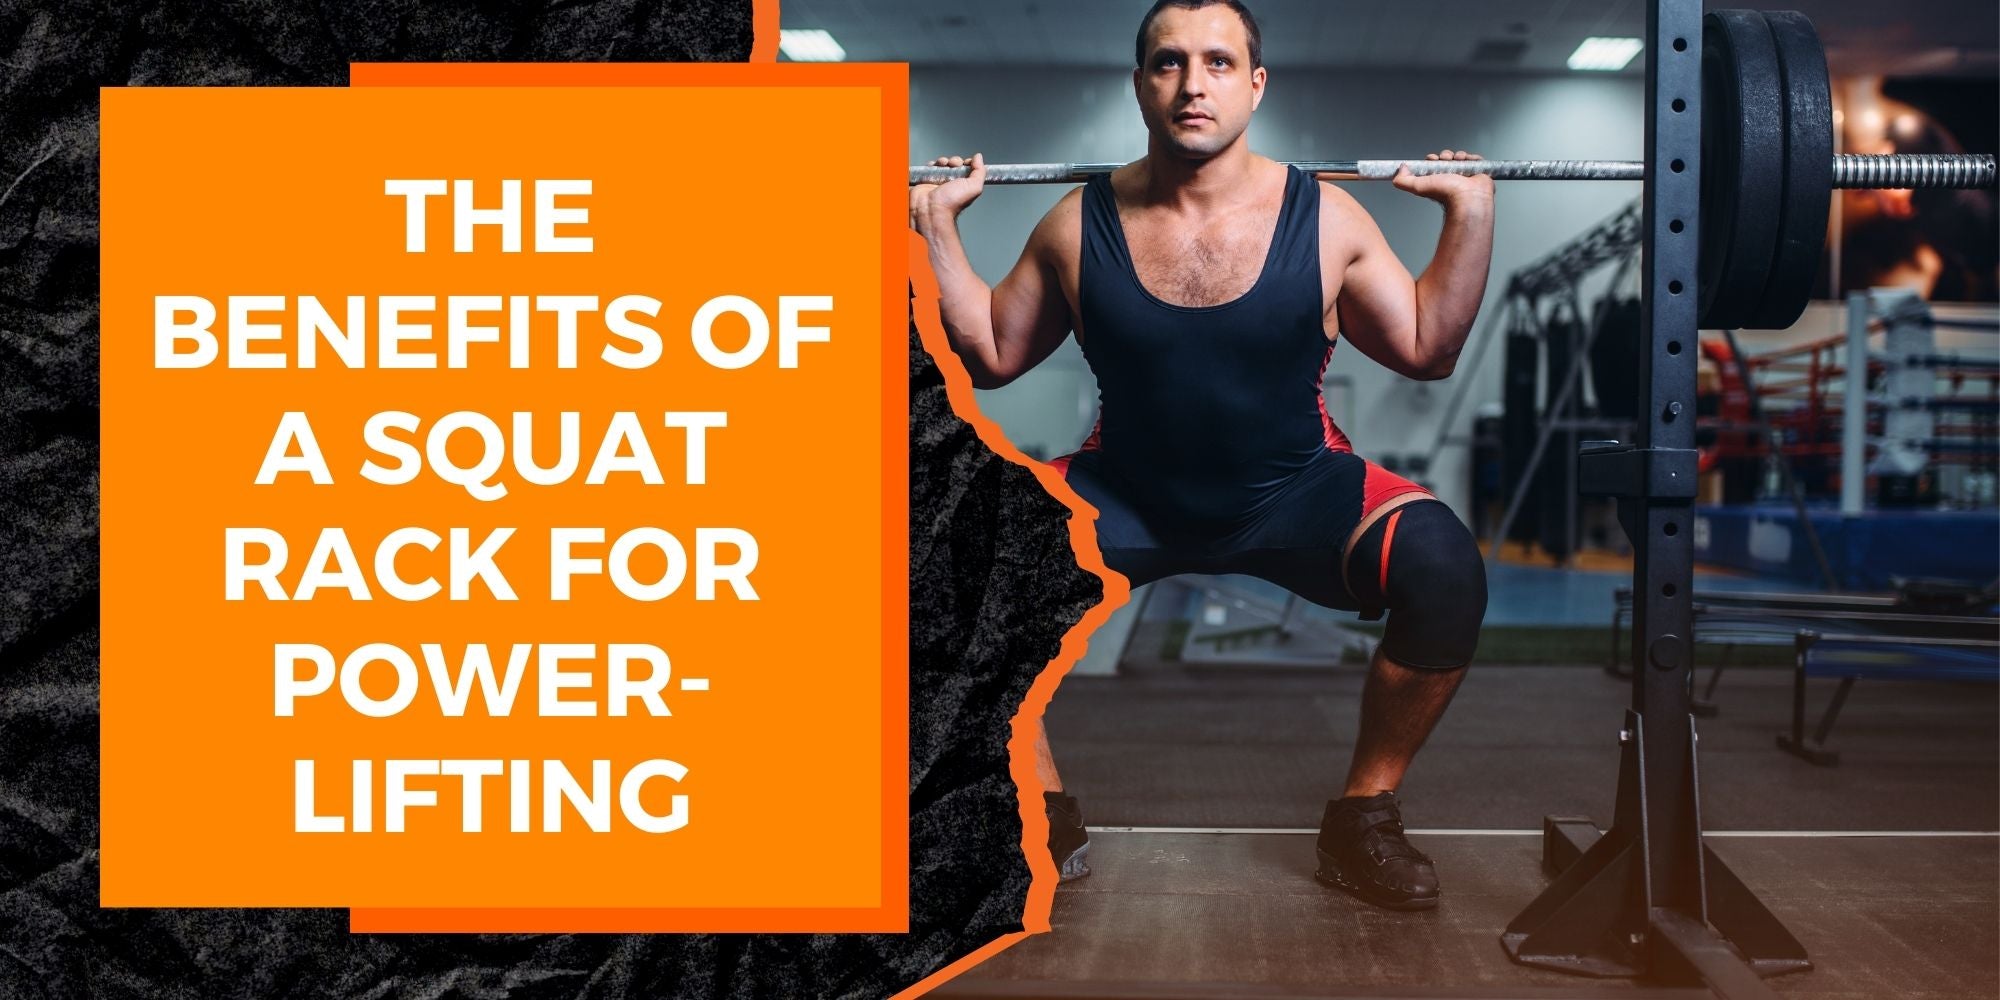 The Benefits of a Squat Rack for Powerlifting